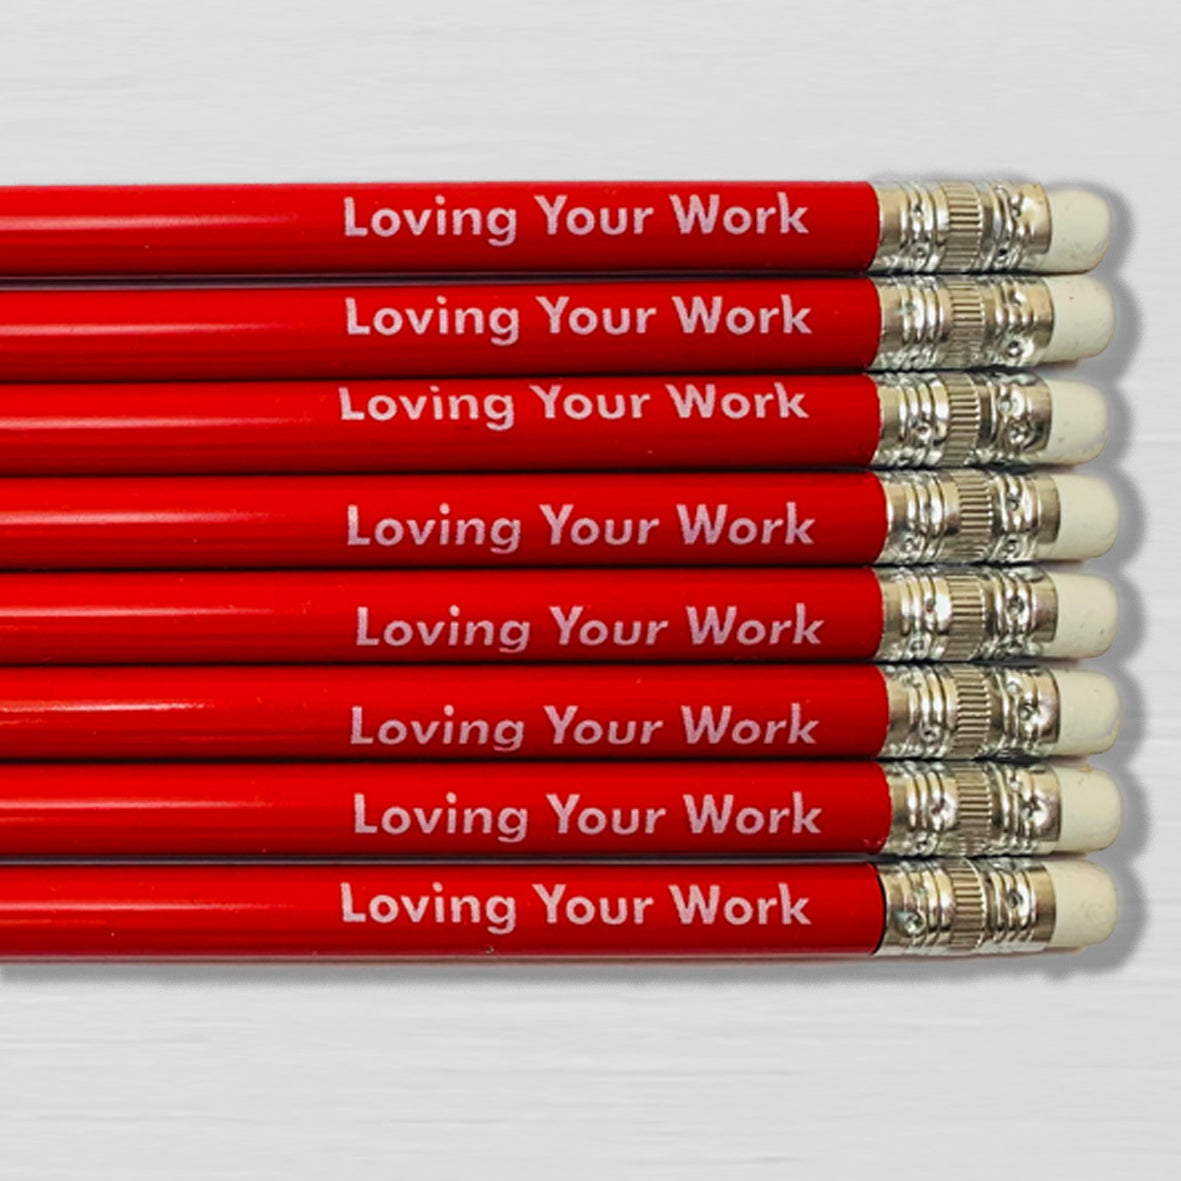 Number Ninety Five, Loving Your Work, 8 sharpened red pencils with white rubber tips, gift wrapped in a kraft box, with 8 pencils stating the phrase Loving Your Work written on them in white text.